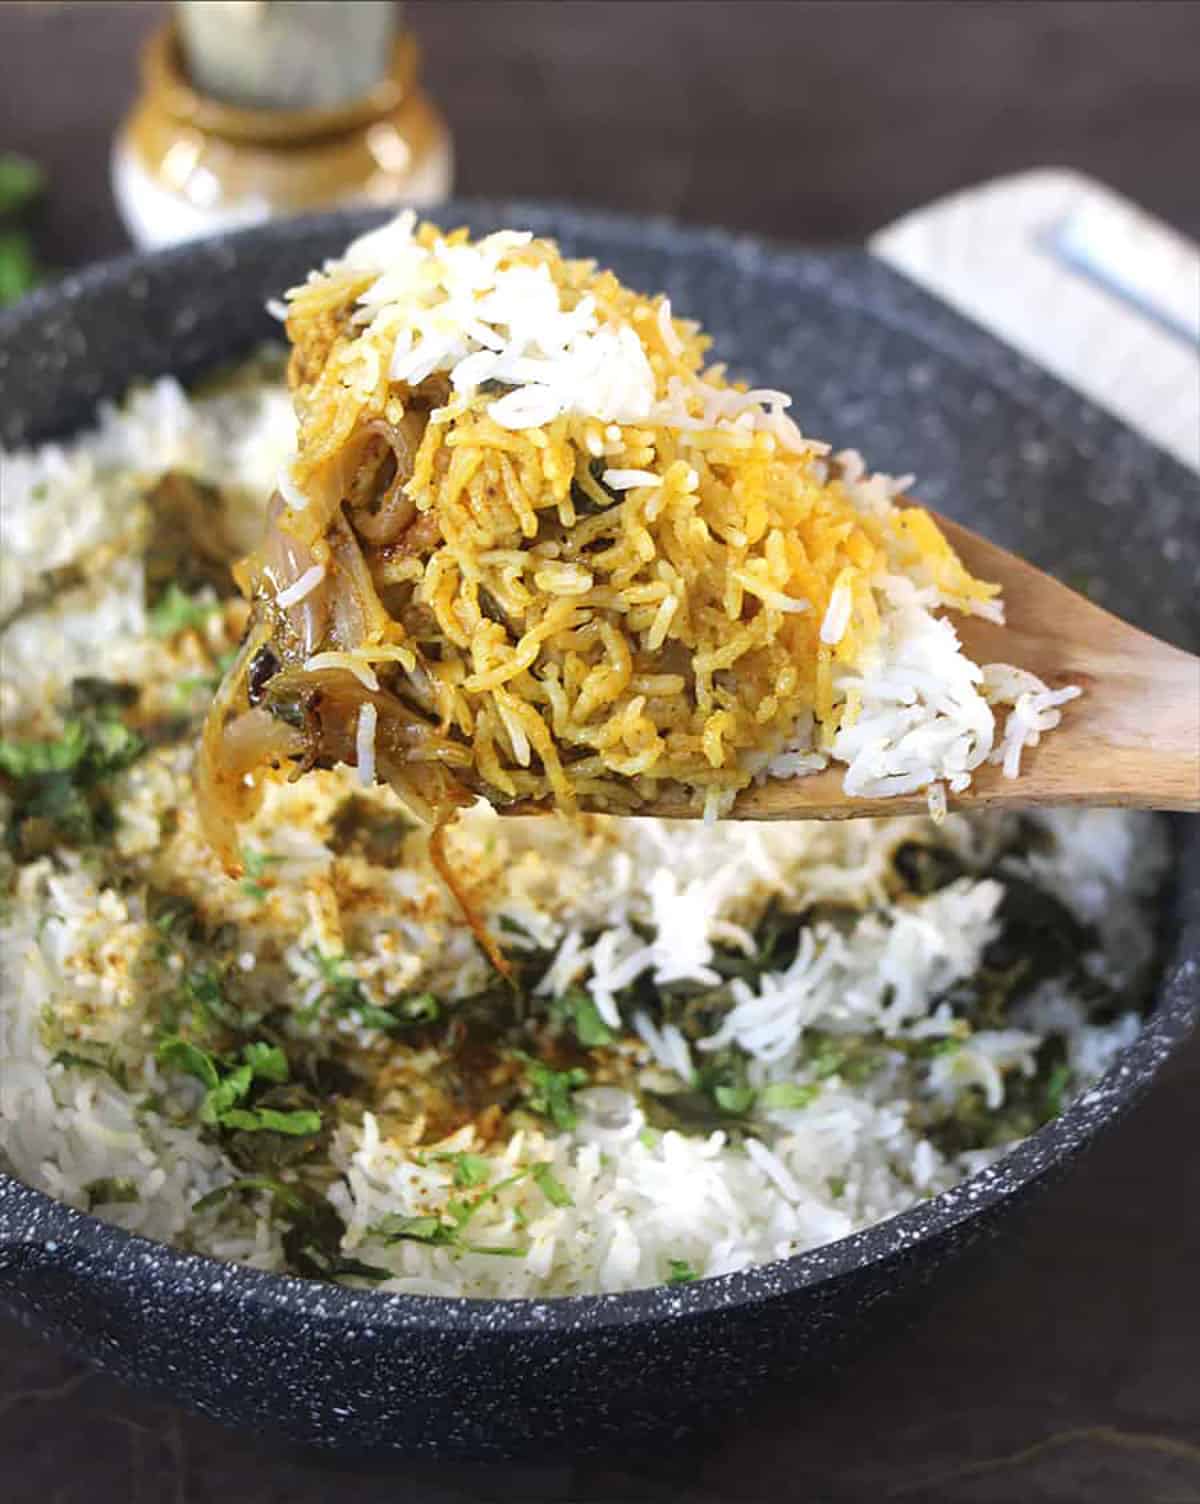 Chicken biryani in a spatula, backround shows the pan or pot in which the biryani was cooked.